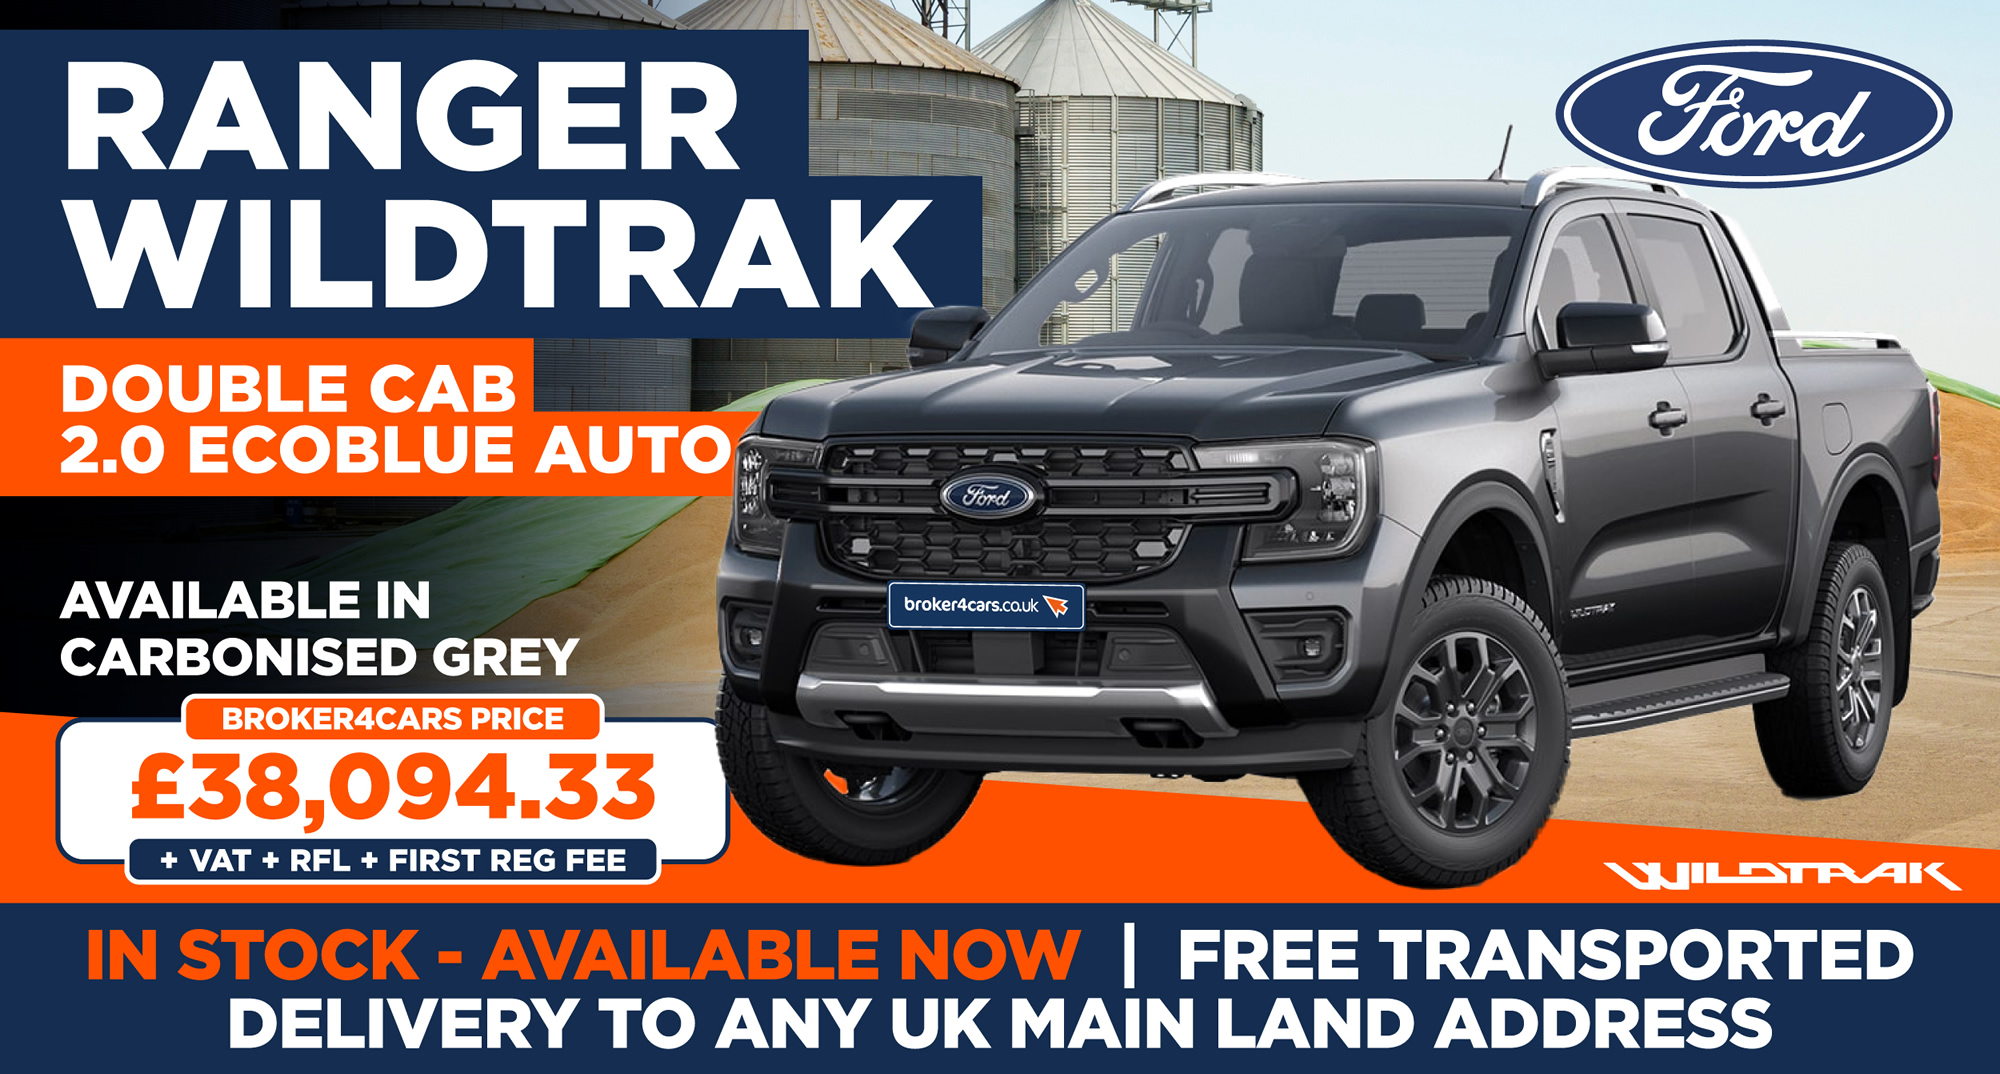 Ranger Wildtrak Double Cab 2.0 Ecoblue AutoAvailable in Carbonised Grey, In stock - Available now. Free Transported Delivery to any UK Mainland Address